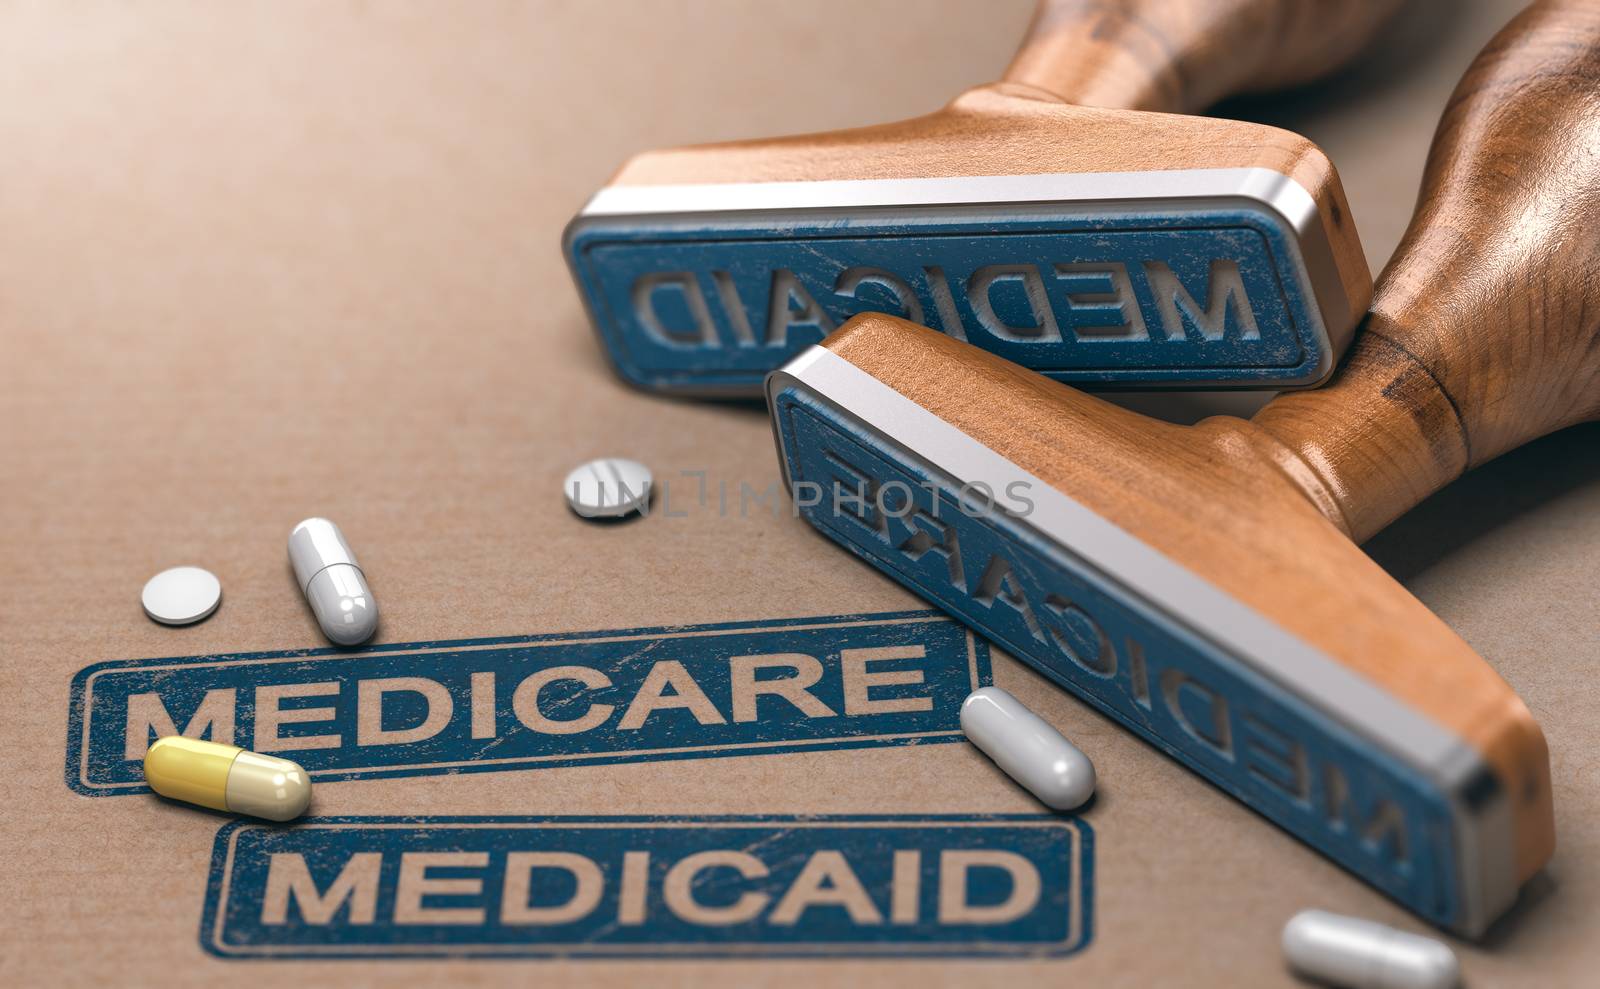 Medicare and Medicaid, National Health Insurance Program In The  by Olivier-Le-Moal